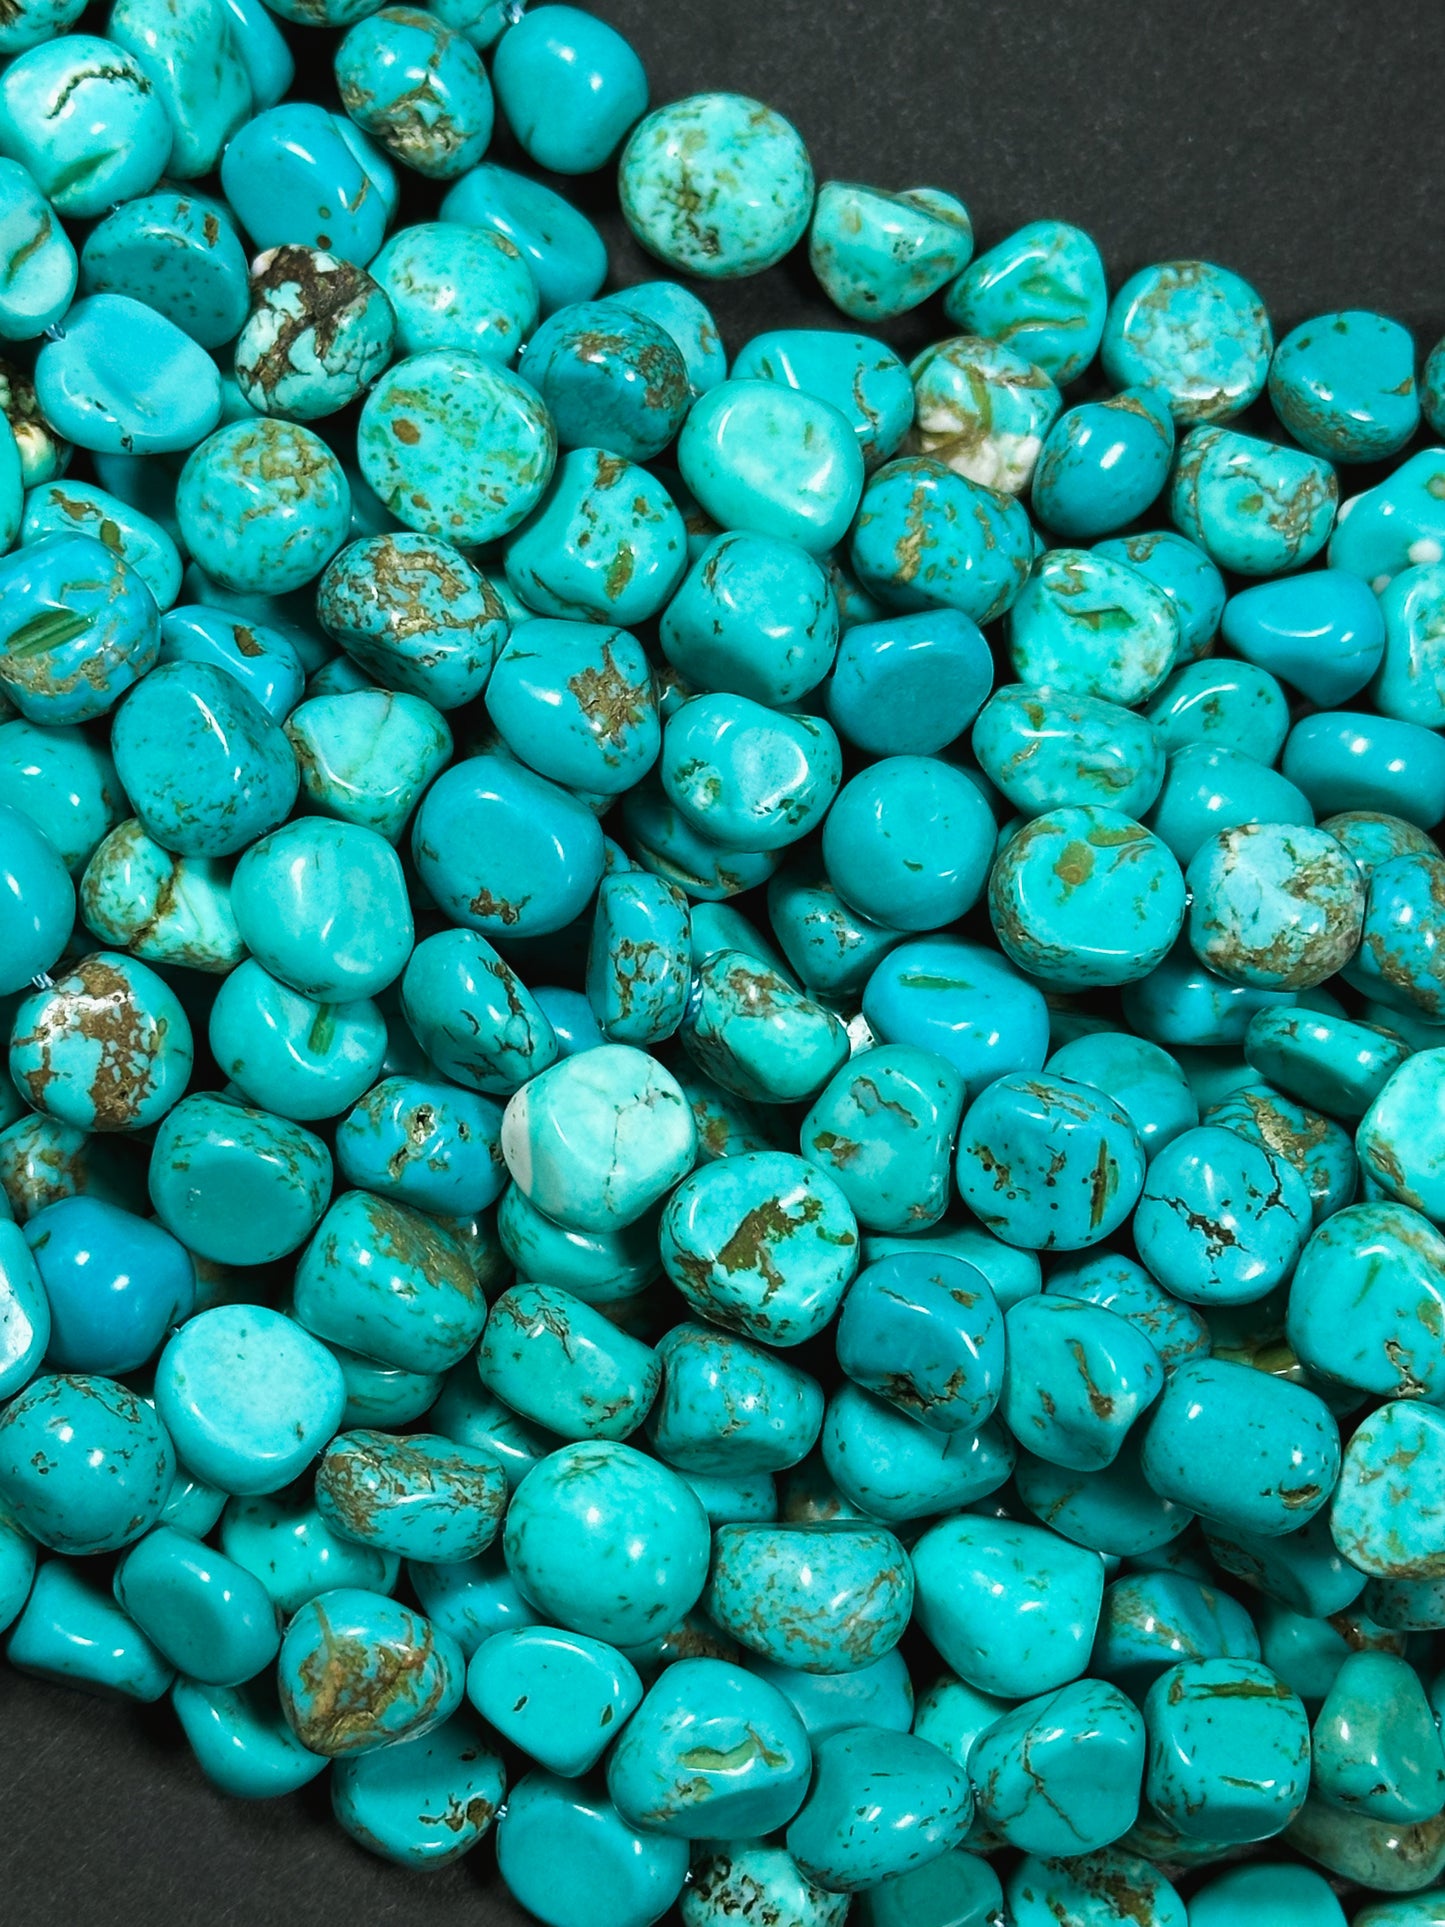 Natural Chinese Turquoise Gemstone Bead 9-12mm Freeform Pebble Shape, Beautiful Natural Blue Color Turquoise Beads, Full Strand 15.5"